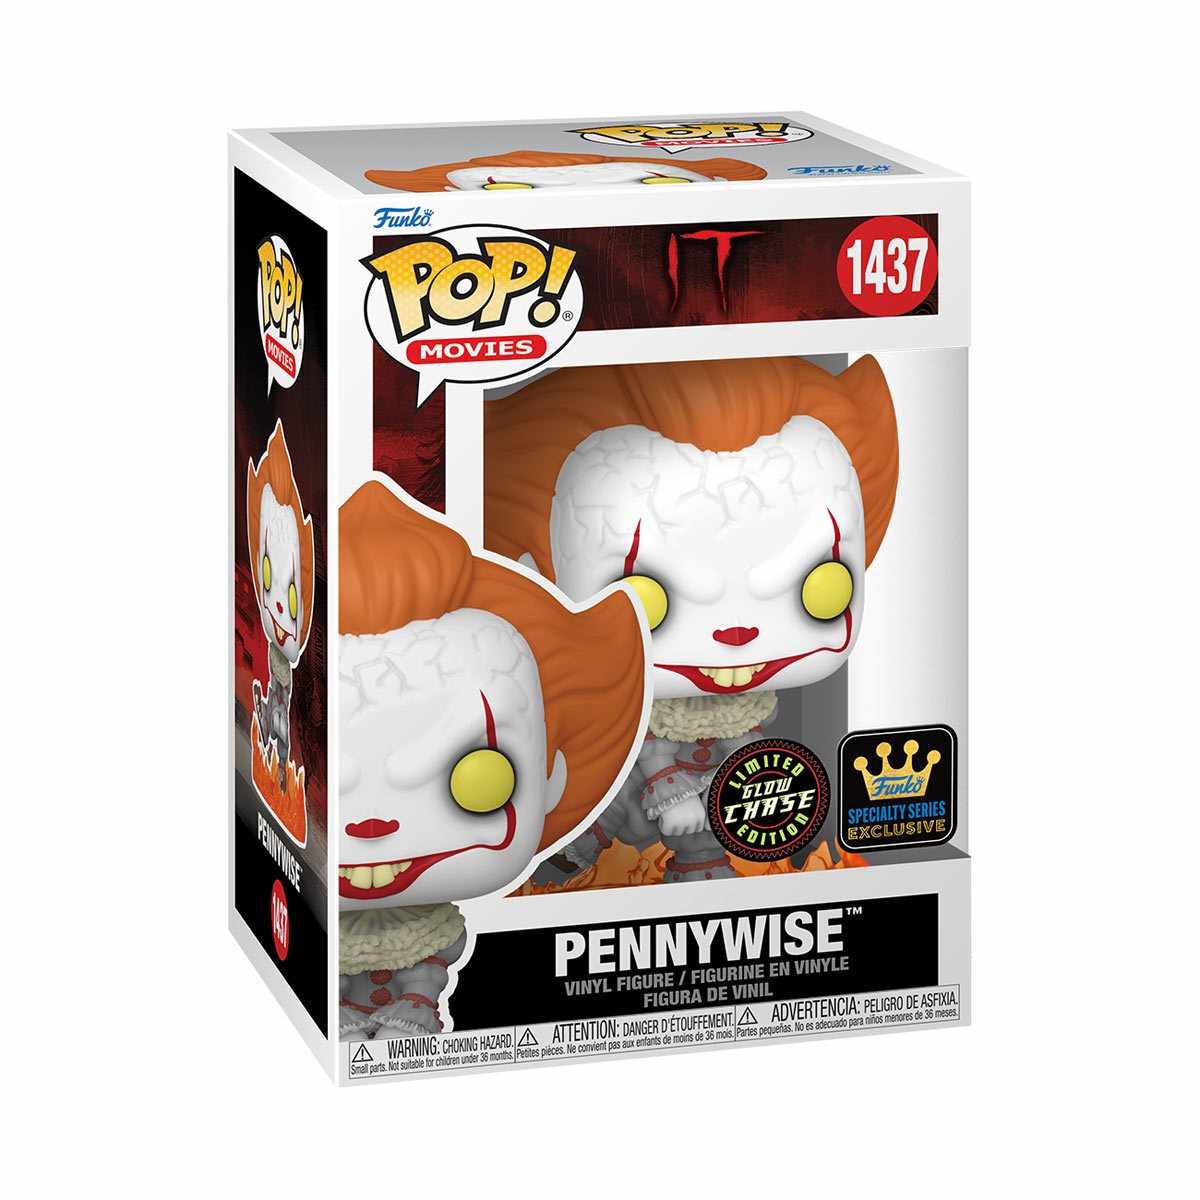 FUNKO POP! PENNYWISE DANCING IT SPECIALTY SERIES CHASE #1437 FIGURE IN STOCK